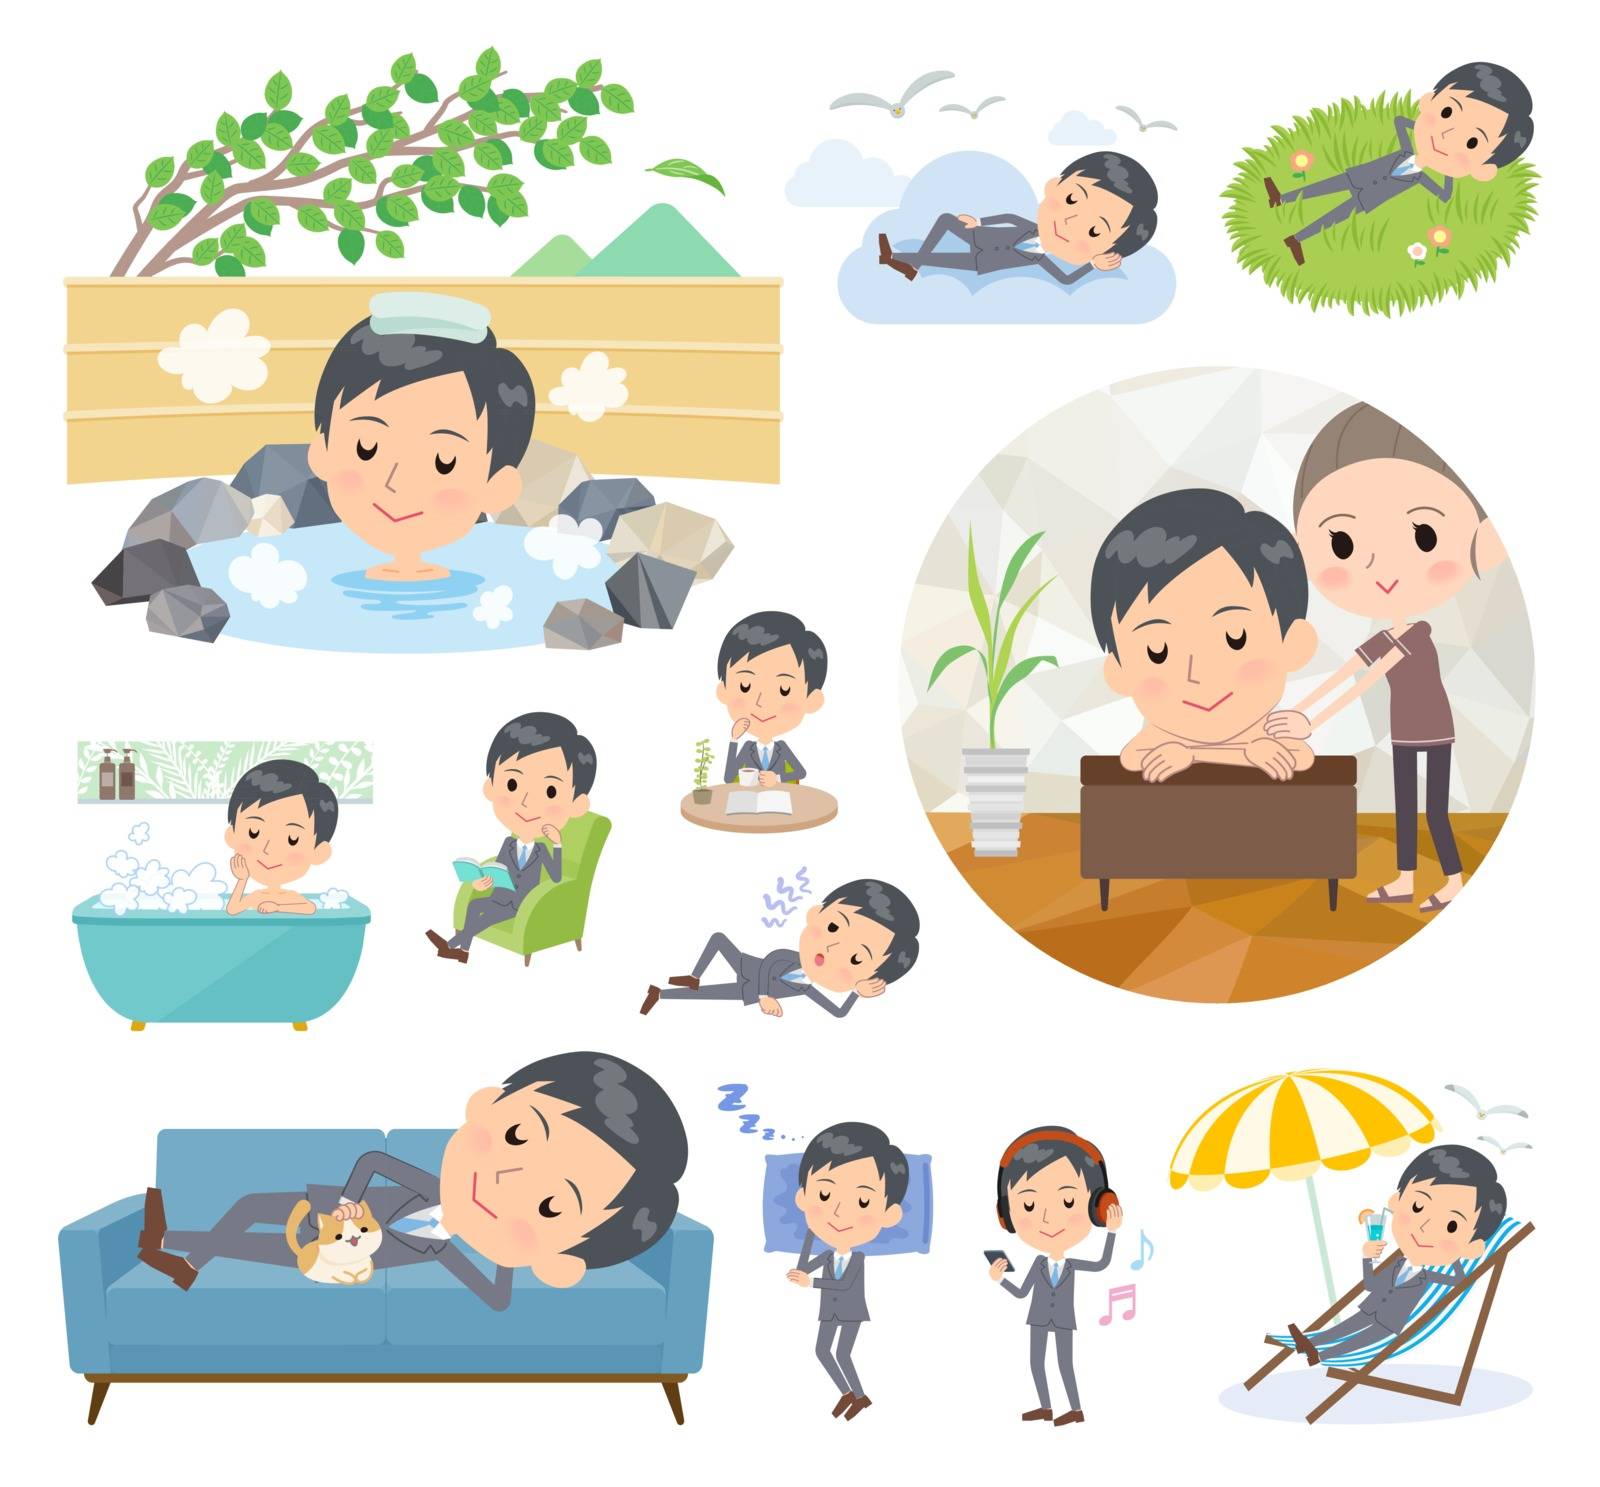 A set of men about relaxing.There are actions such as vacation and stress relief.It's vector art so it's easy to edit.